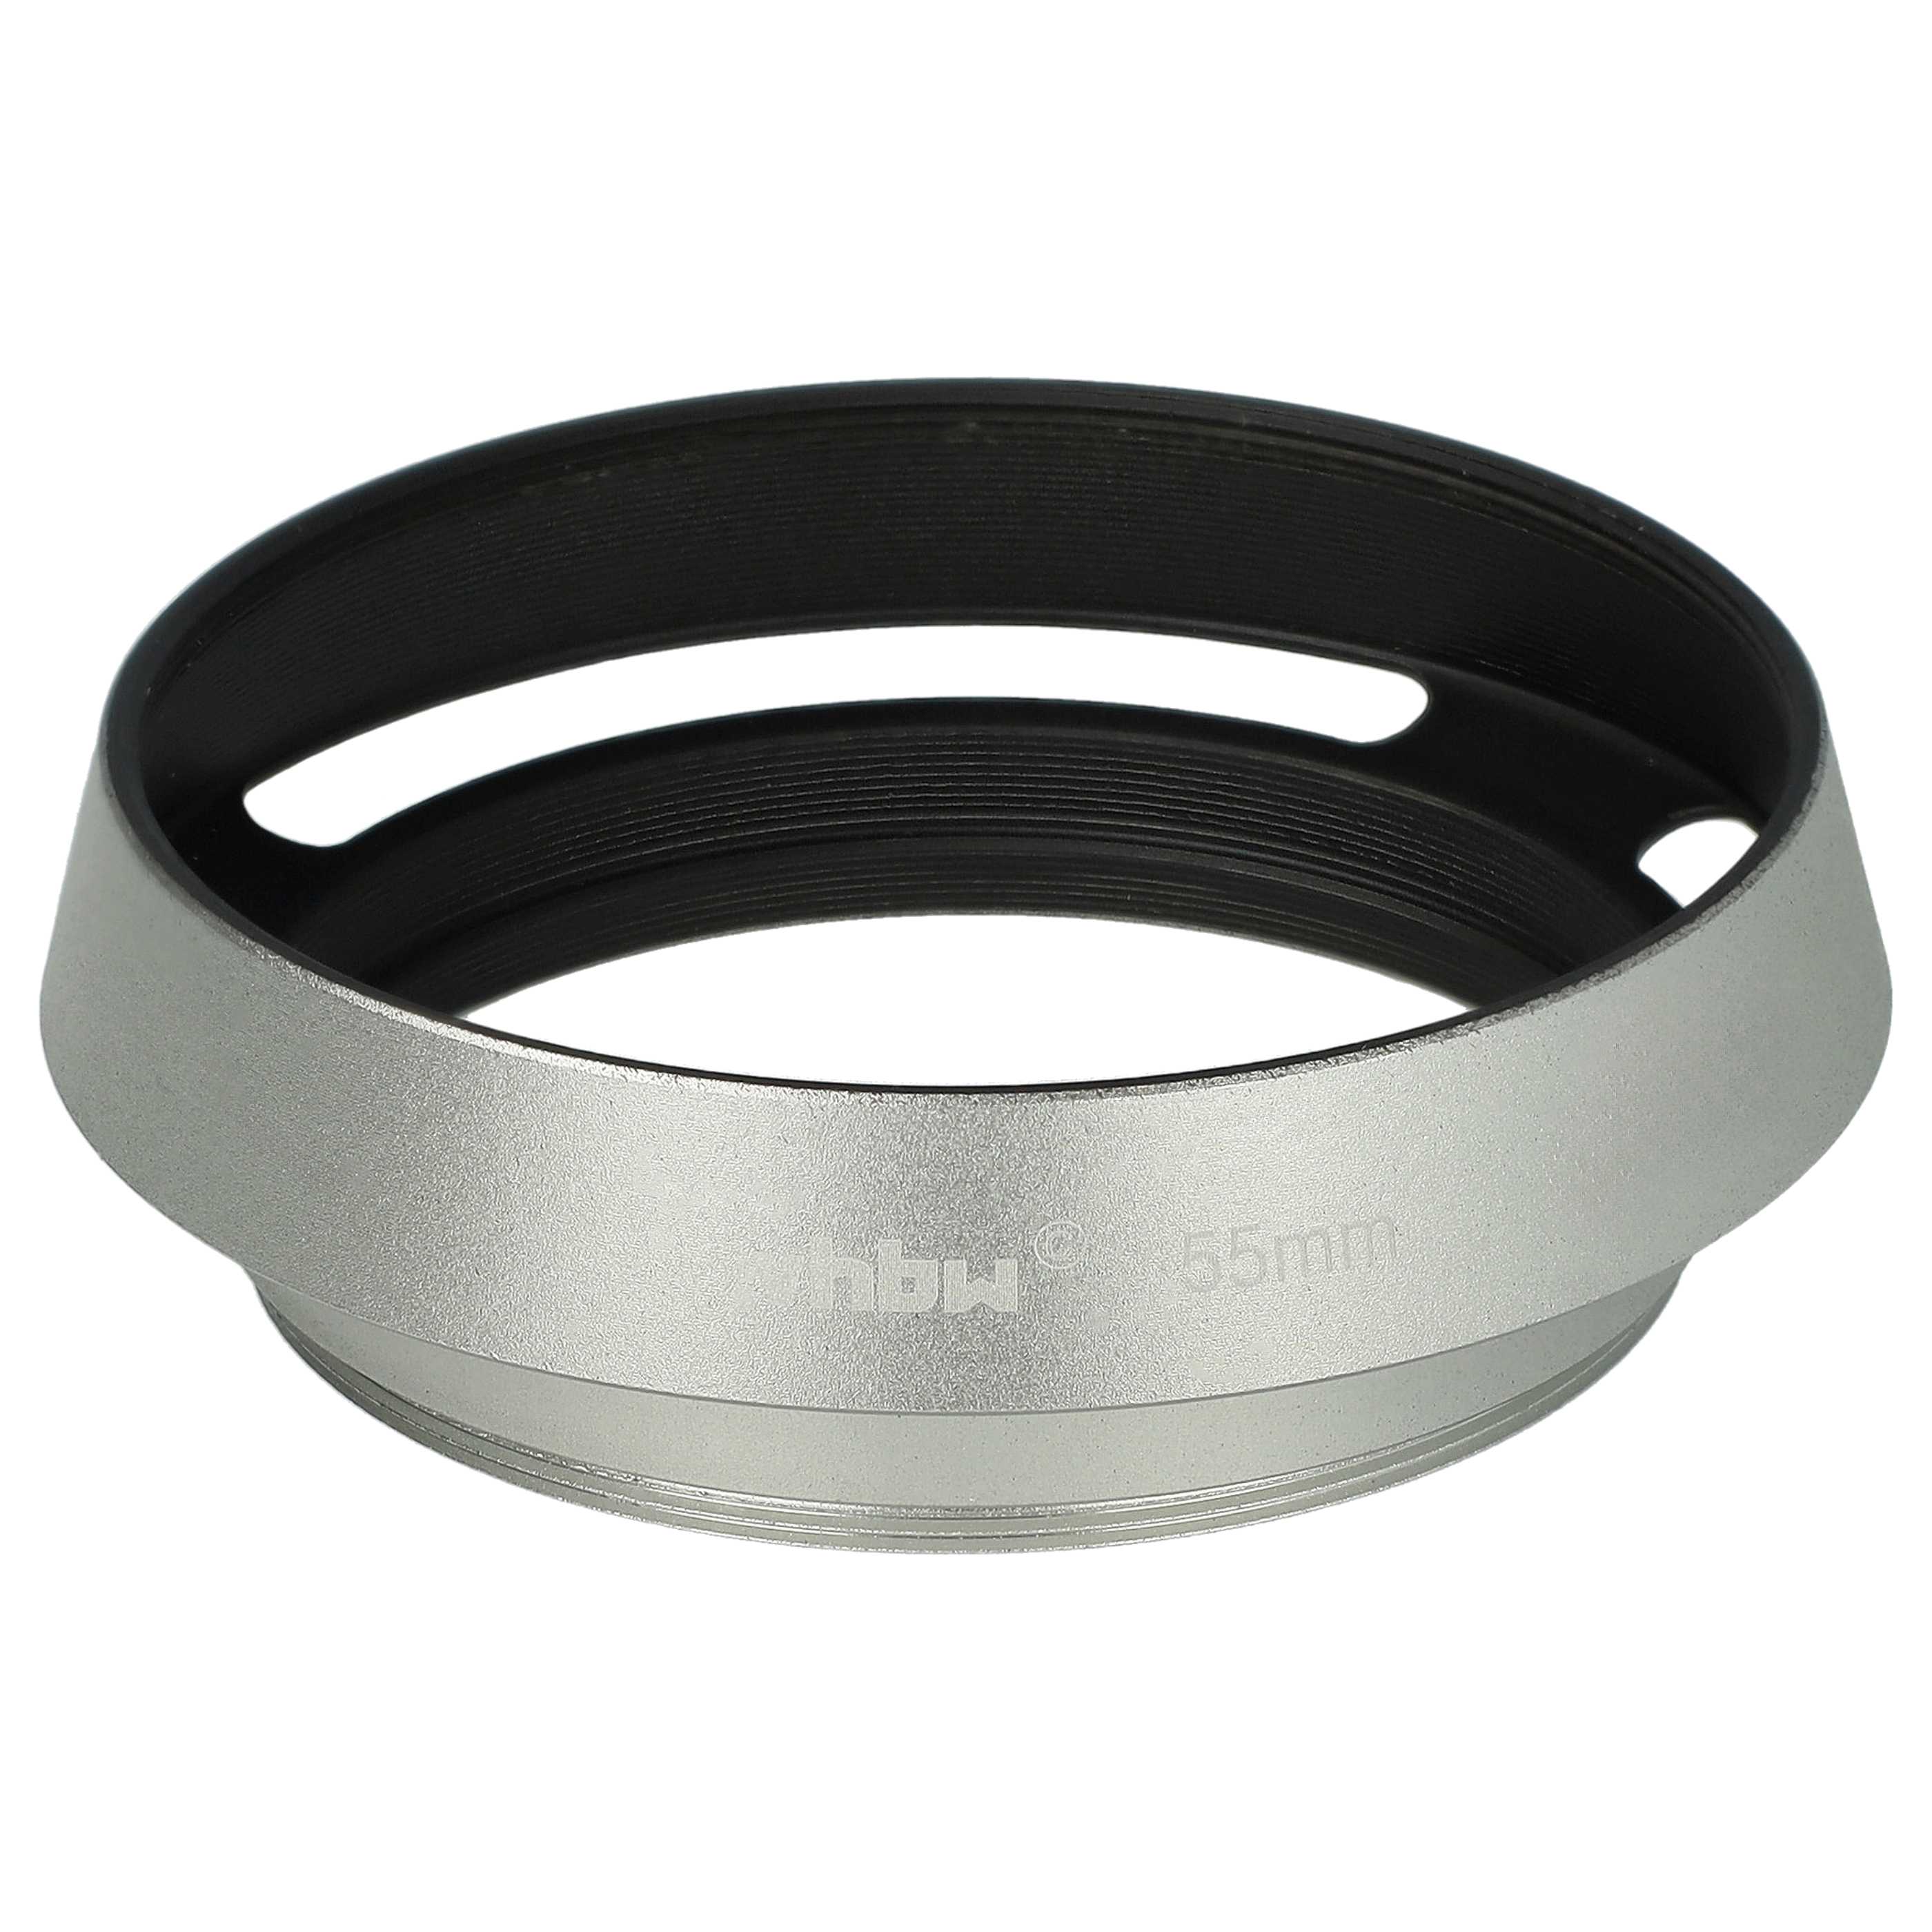 Lens Hood suitable for 55mm Lens - Lens Shade Silver, Round